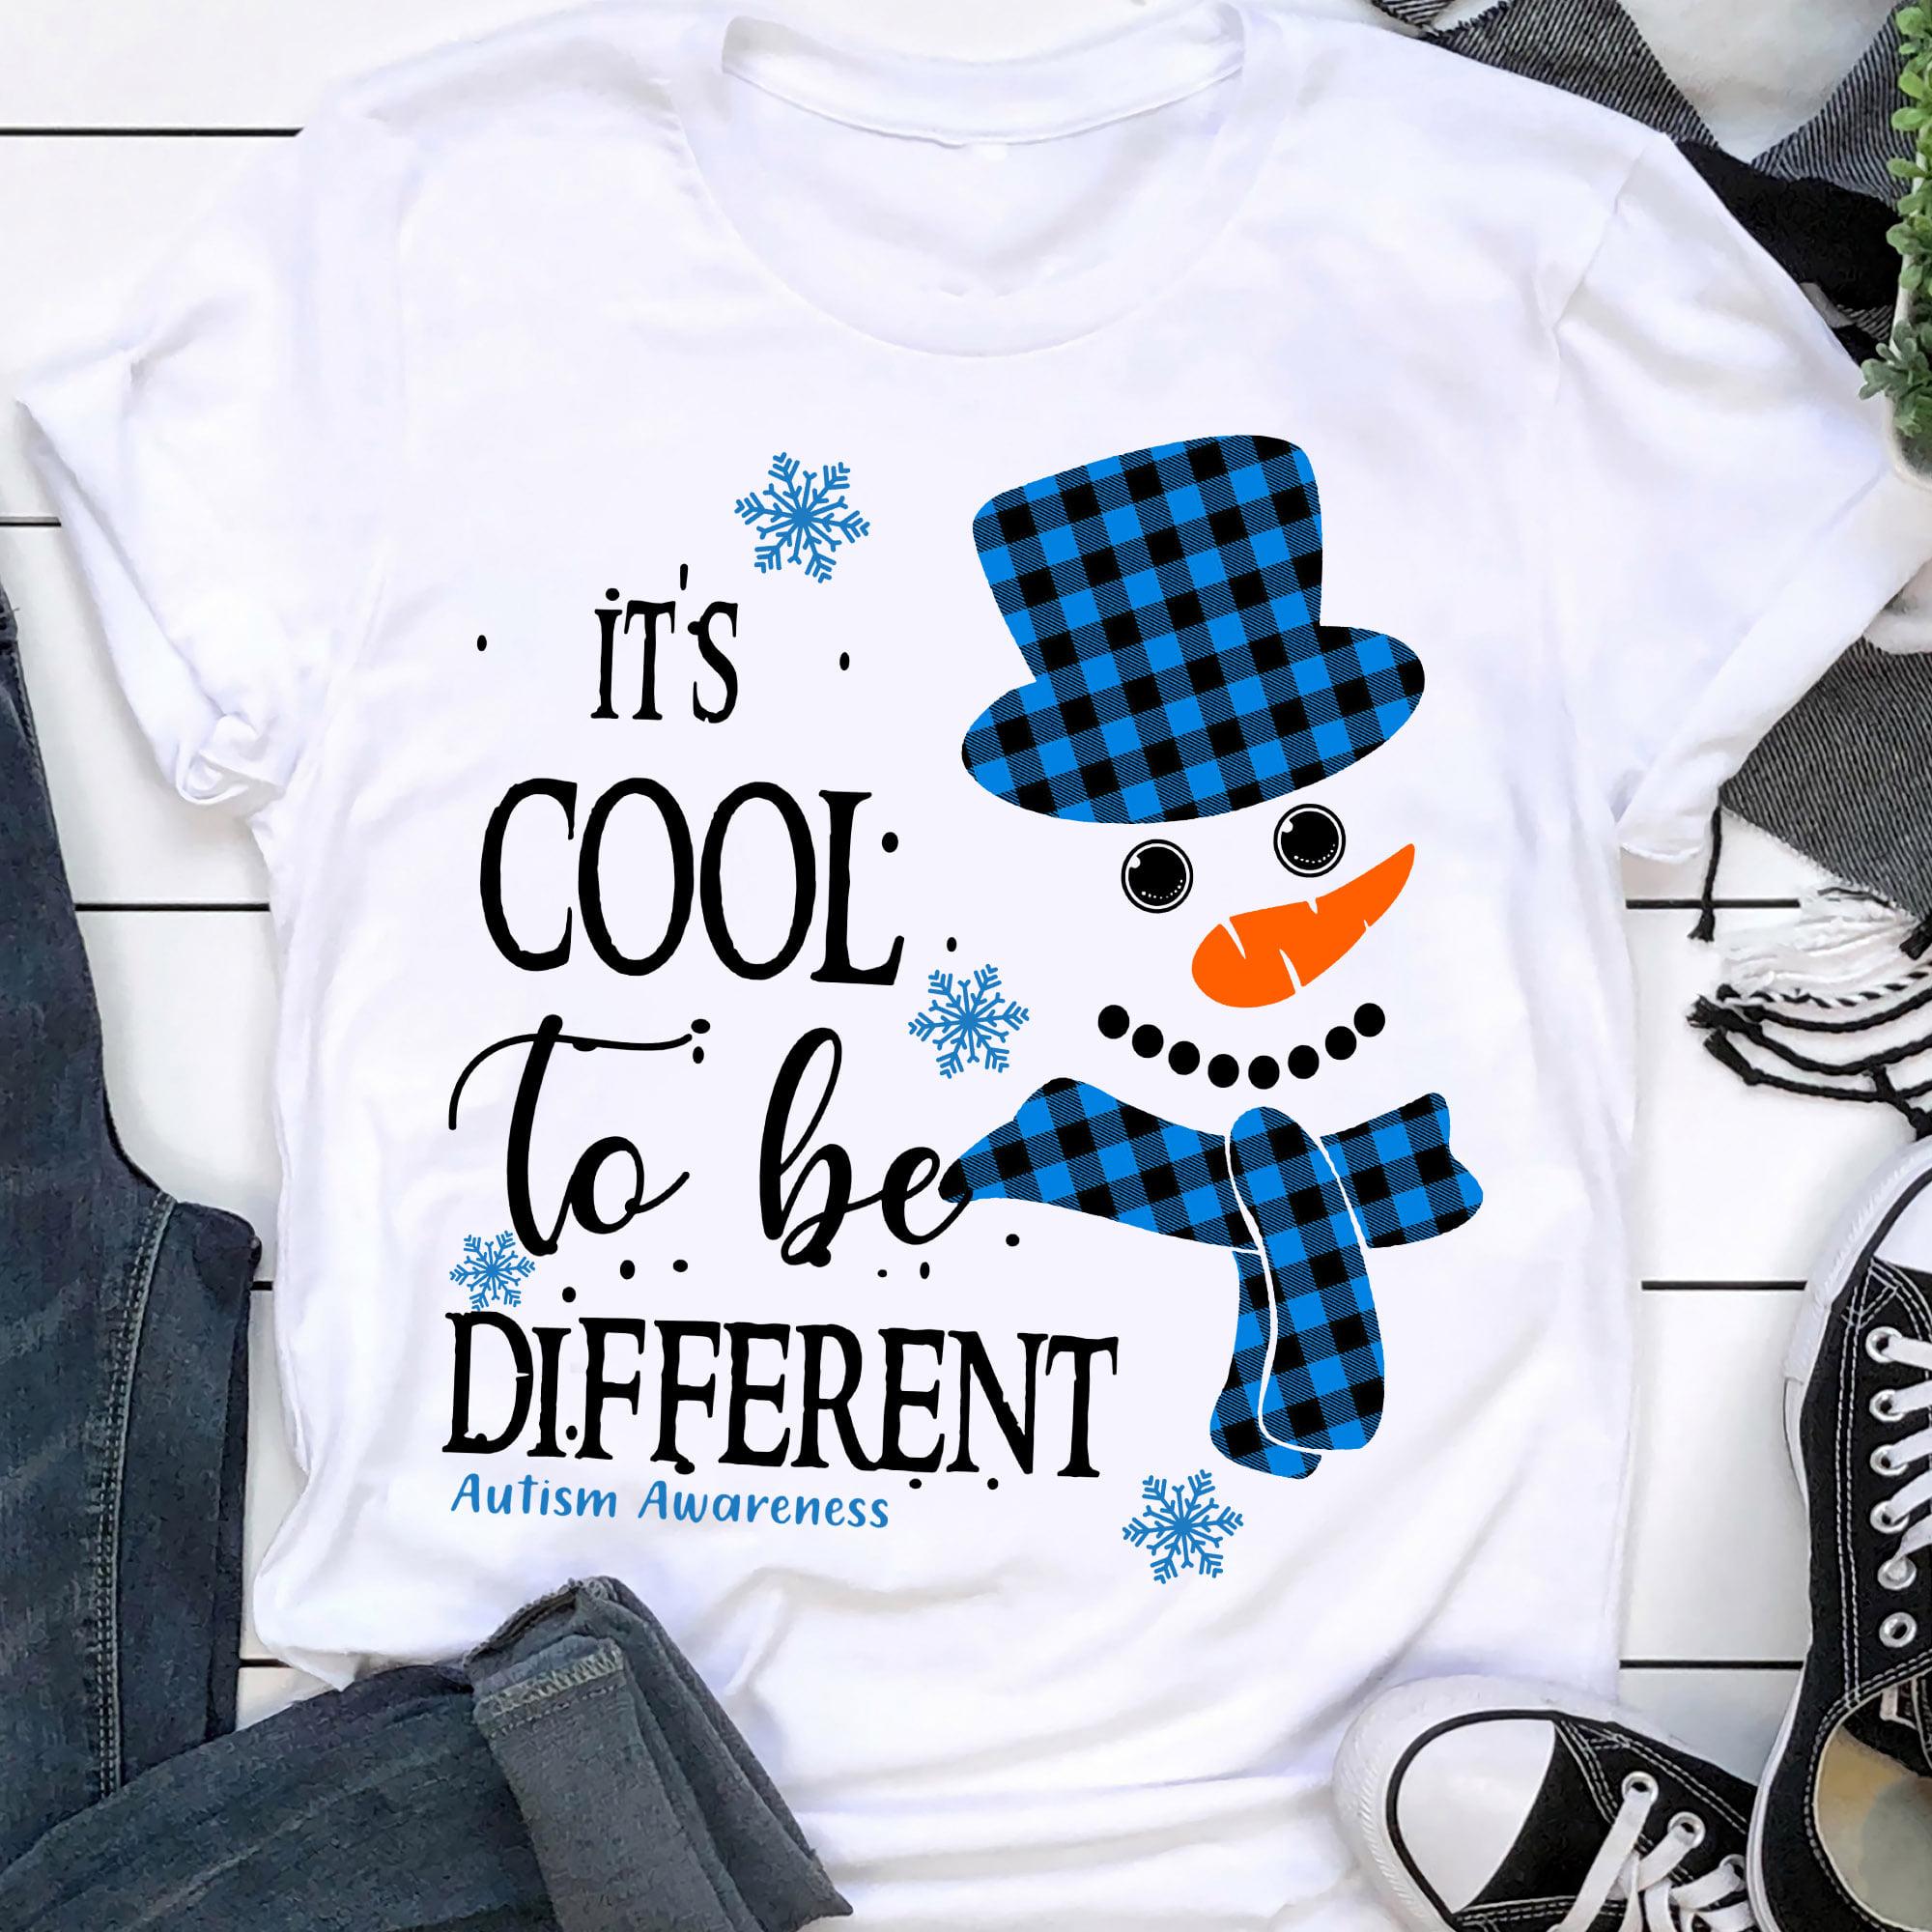 It's cool to be different - Autism awareness, Christmas cute snowman